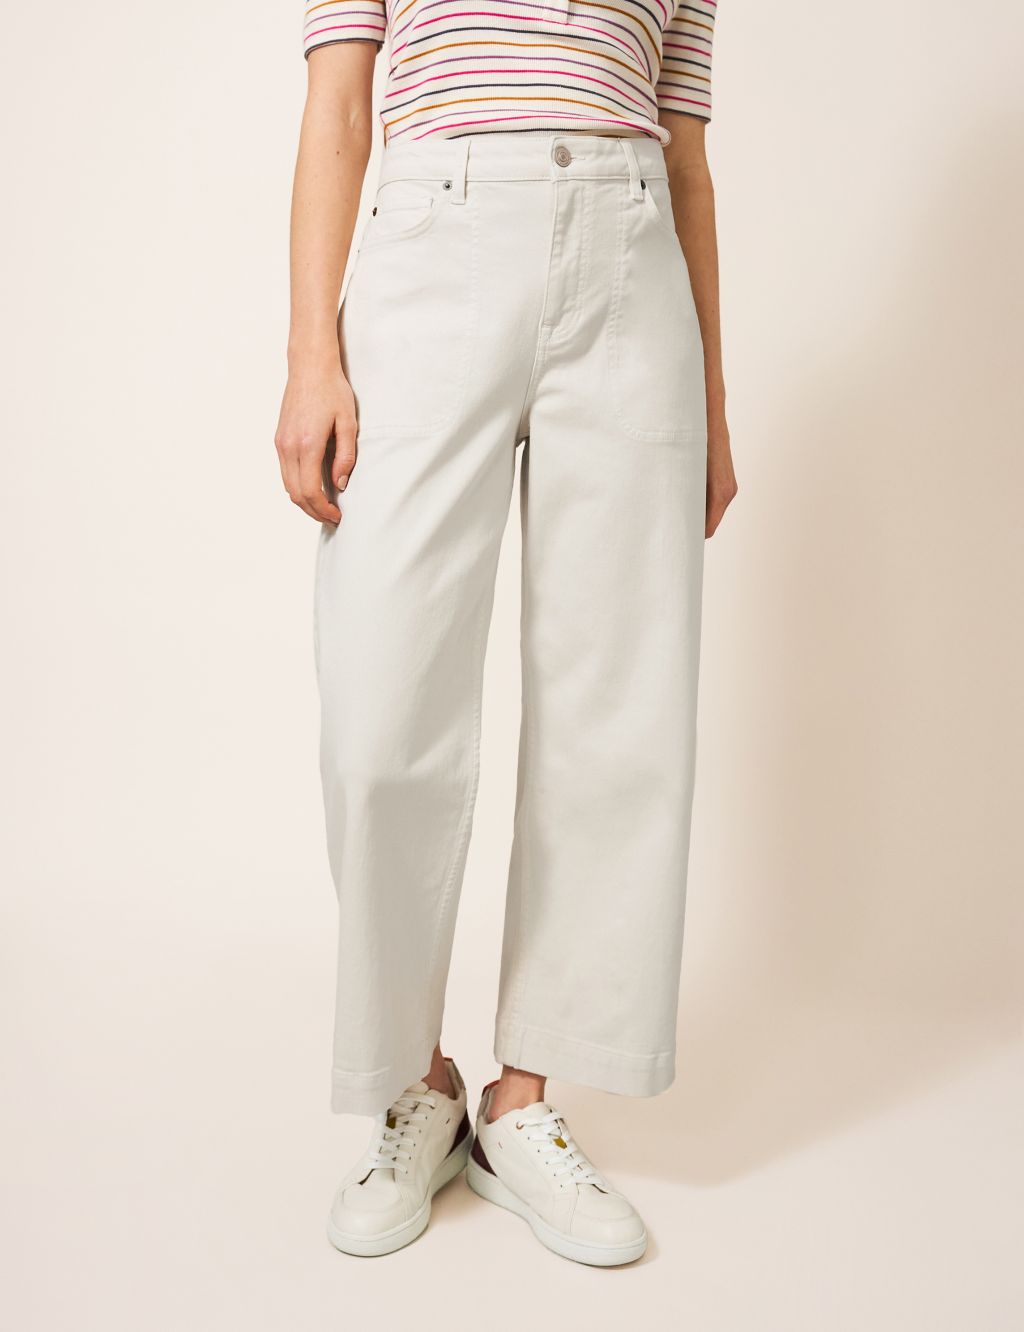 Wide Leg Cropped Jeans image 2